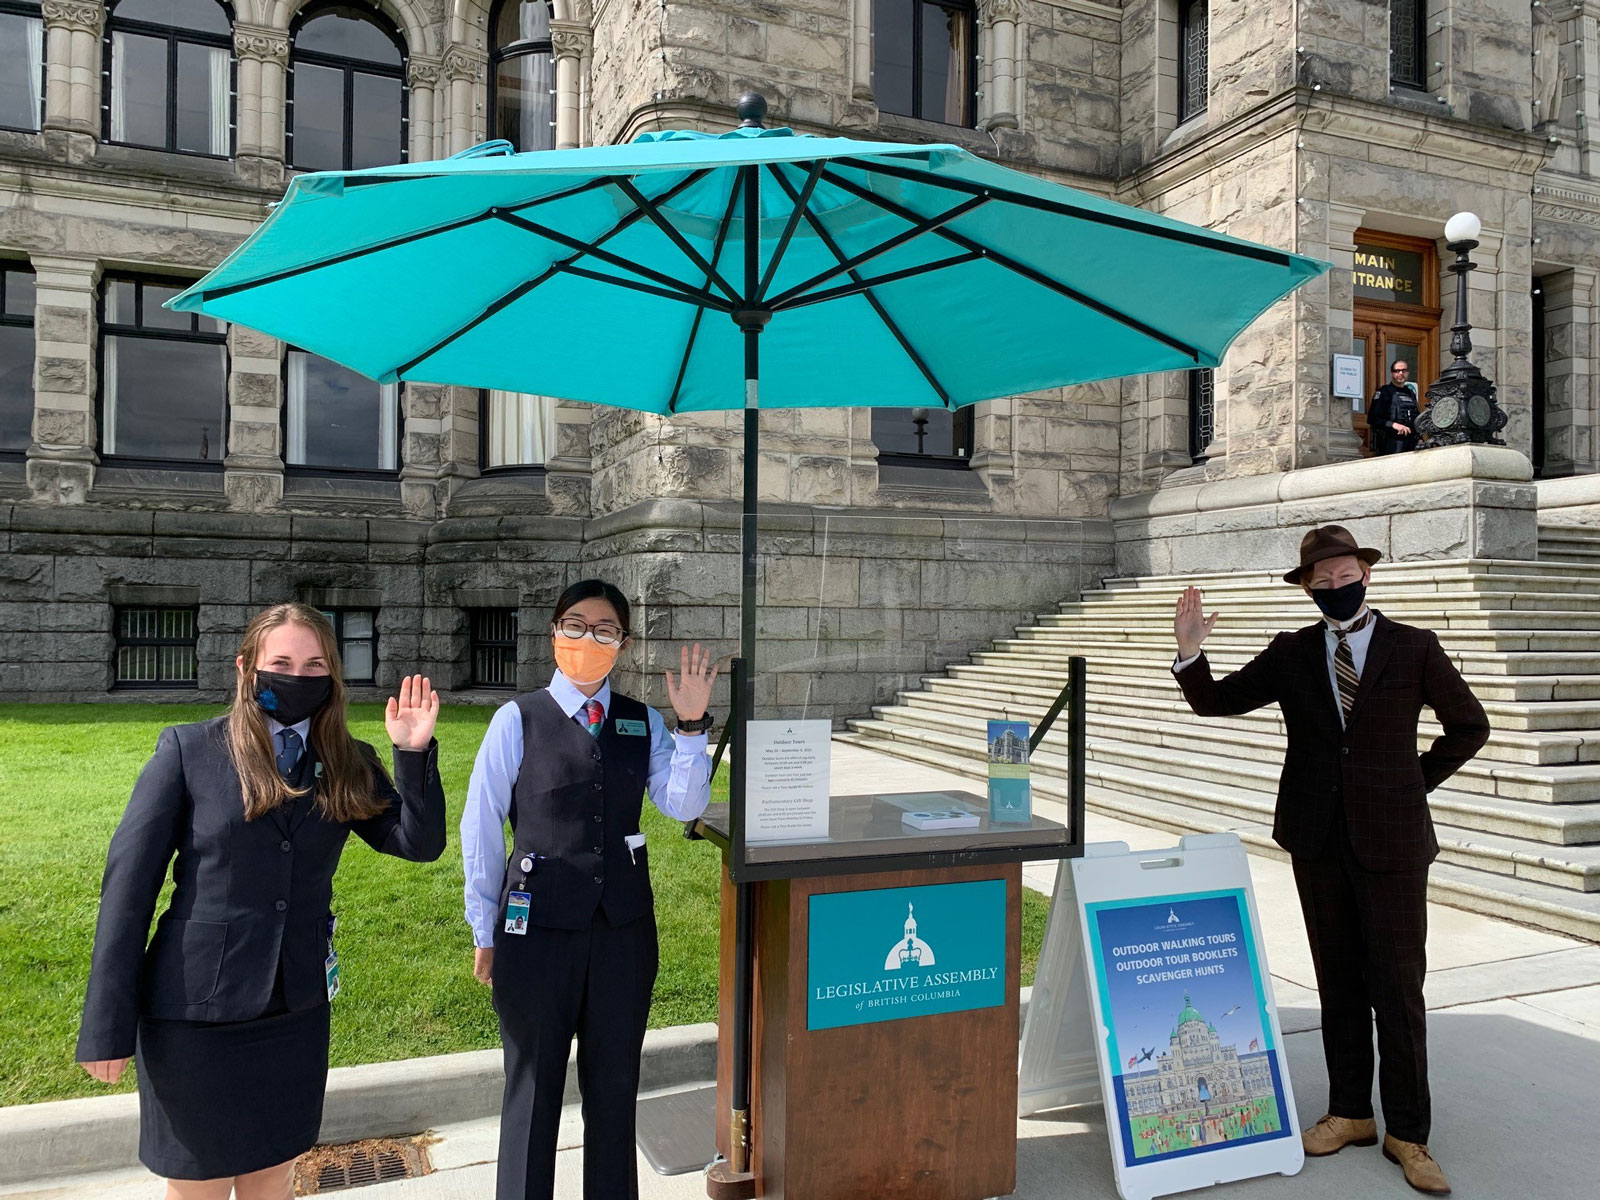 3 Legislative Assembly summer tour guides waving standing beside the tour guide kiosk beside the Legislative Assembly steps to the front door, with a turquoise umbrella overhead.